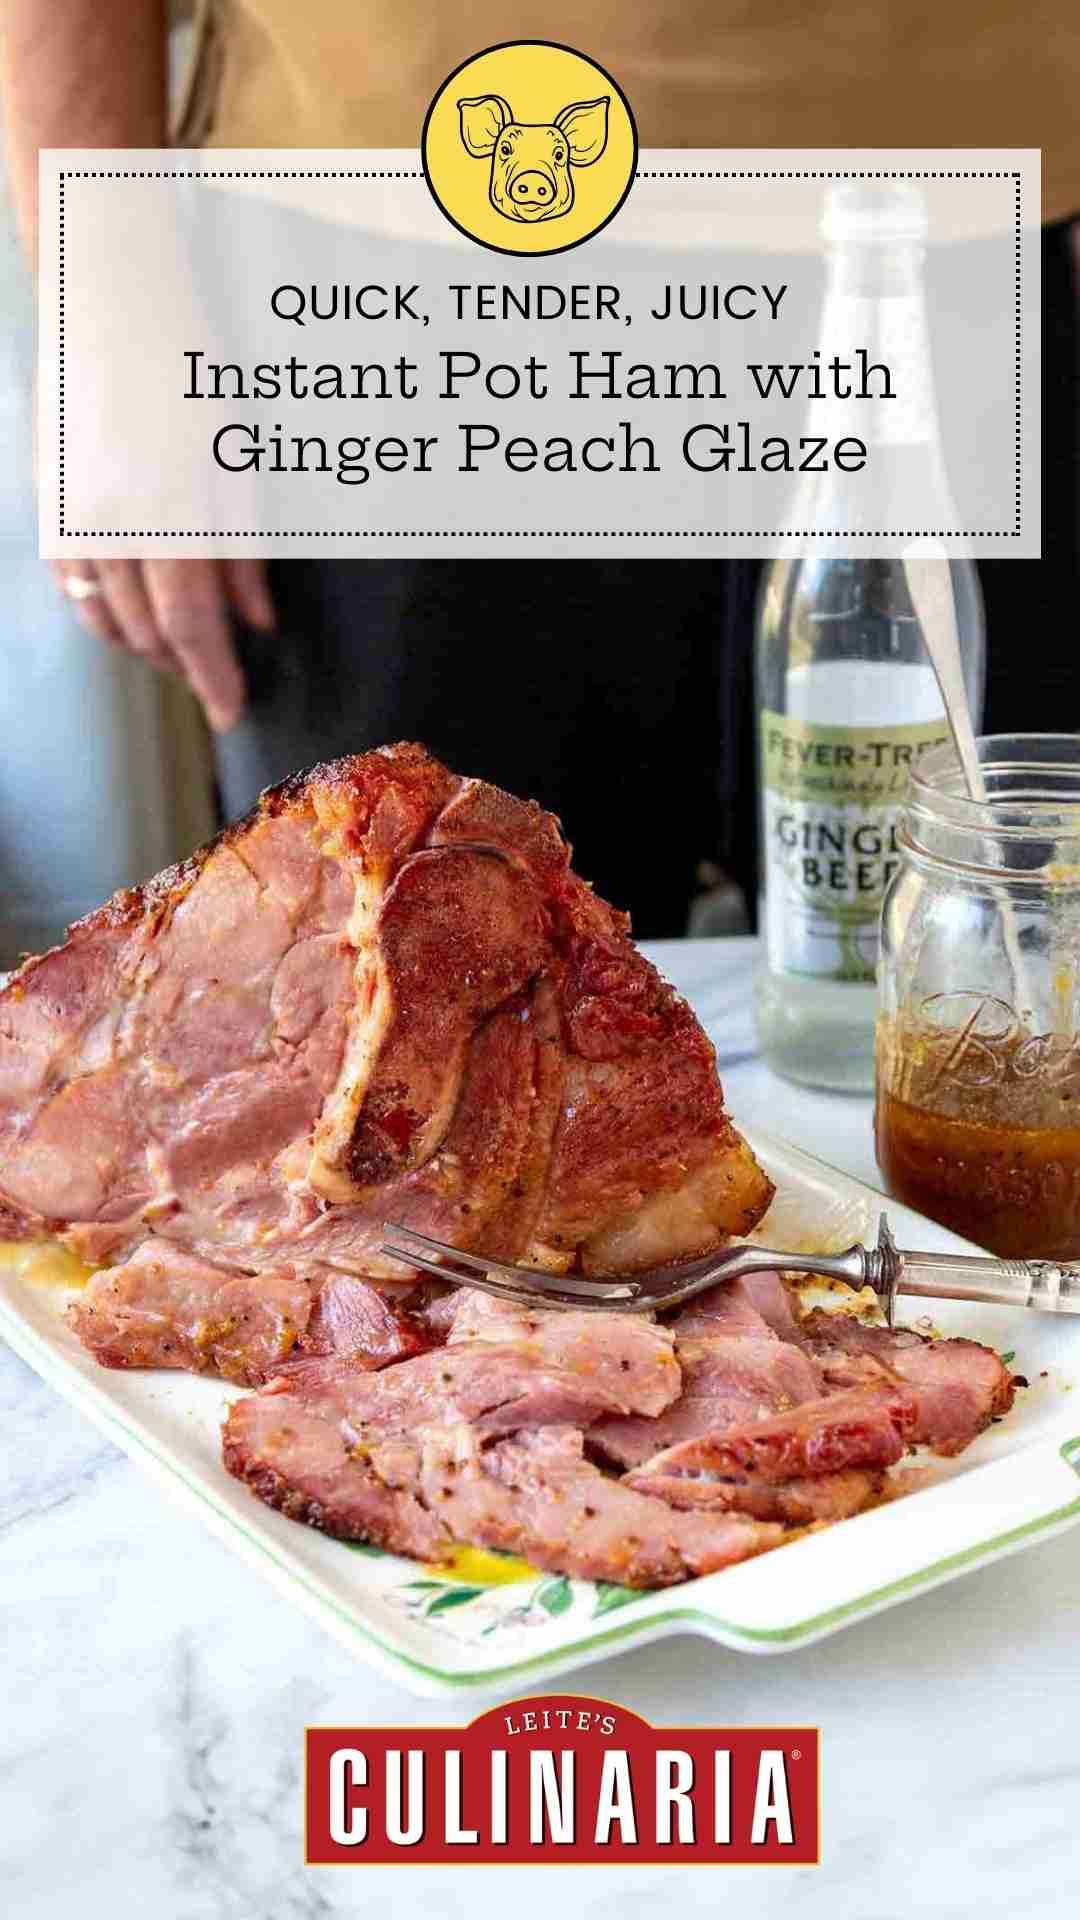 A partially carved Instant pot ham on a platter with a jar of glaze and bottle of ginger beer nearby.